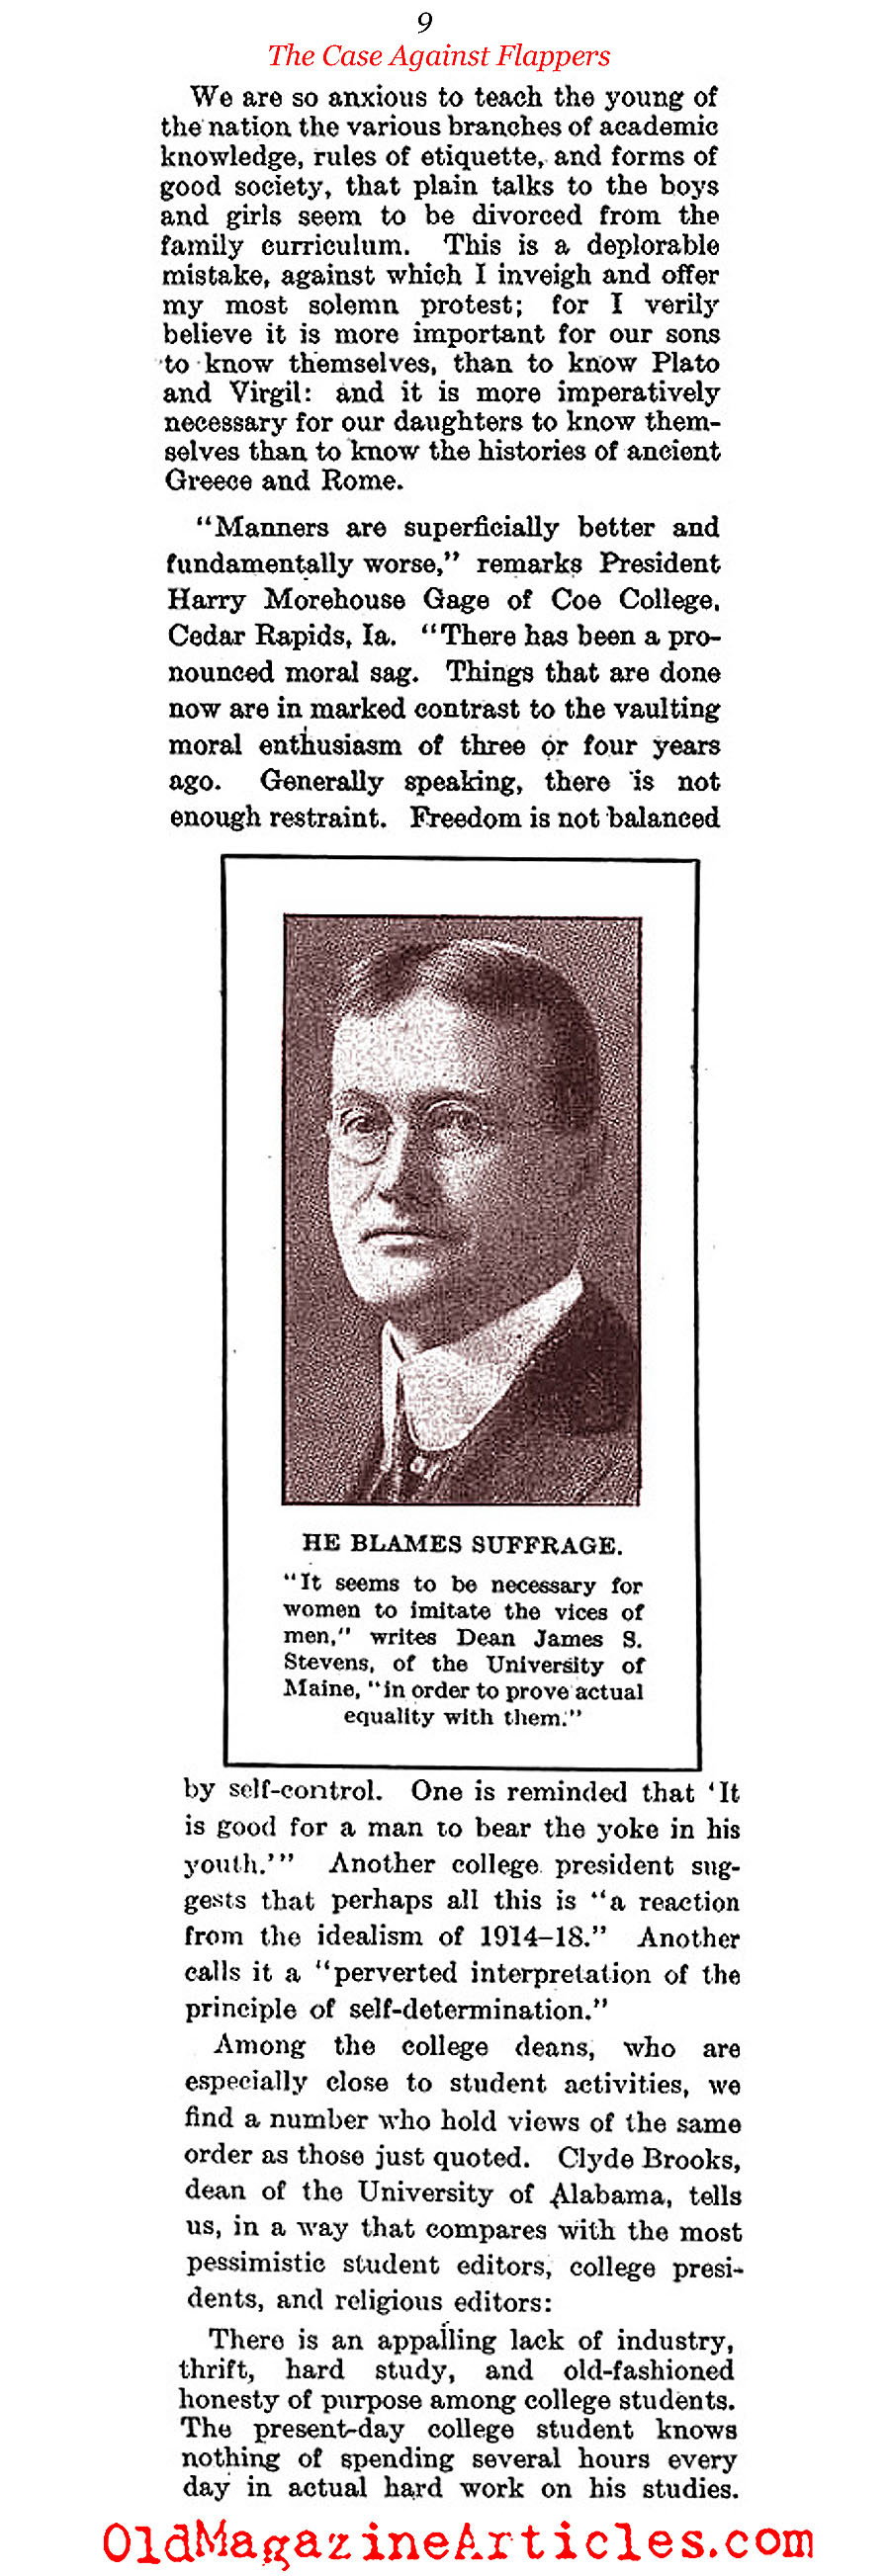 The Case Against Flappers (Literary Digest, 1922)